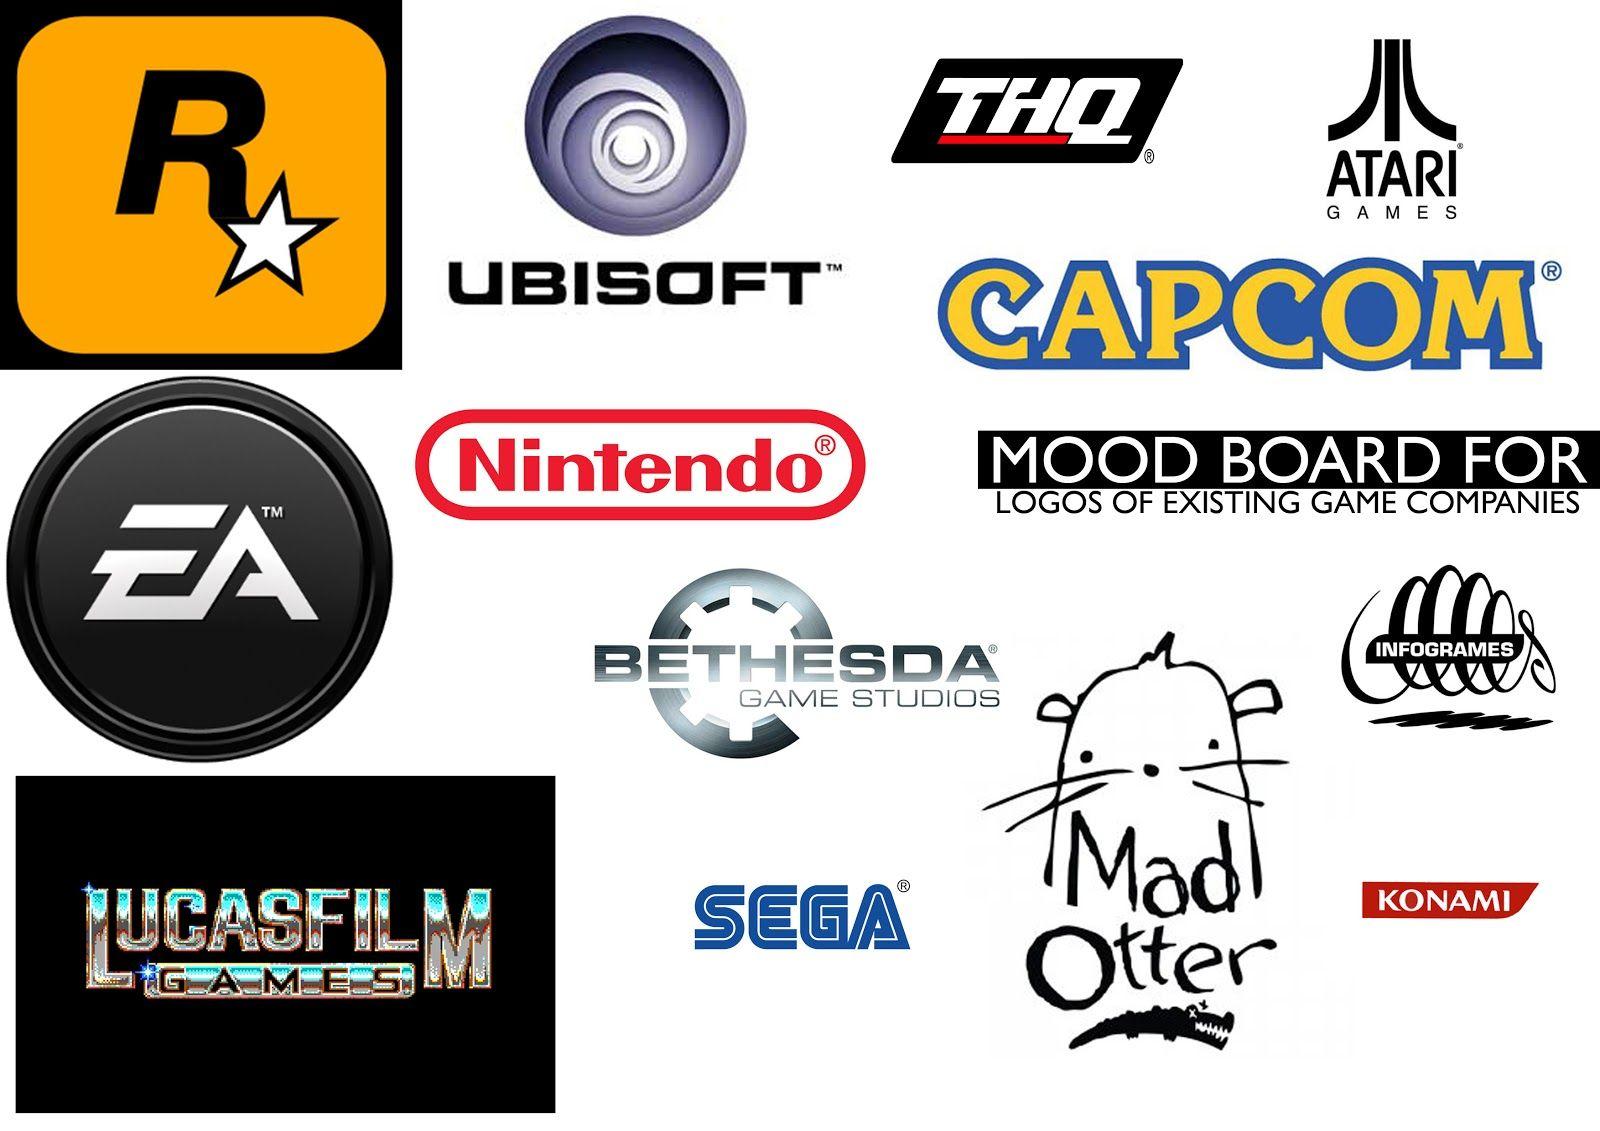 Game Company Logo - Image Gallery of Video Game Company Logo. Logo. Logos, Company